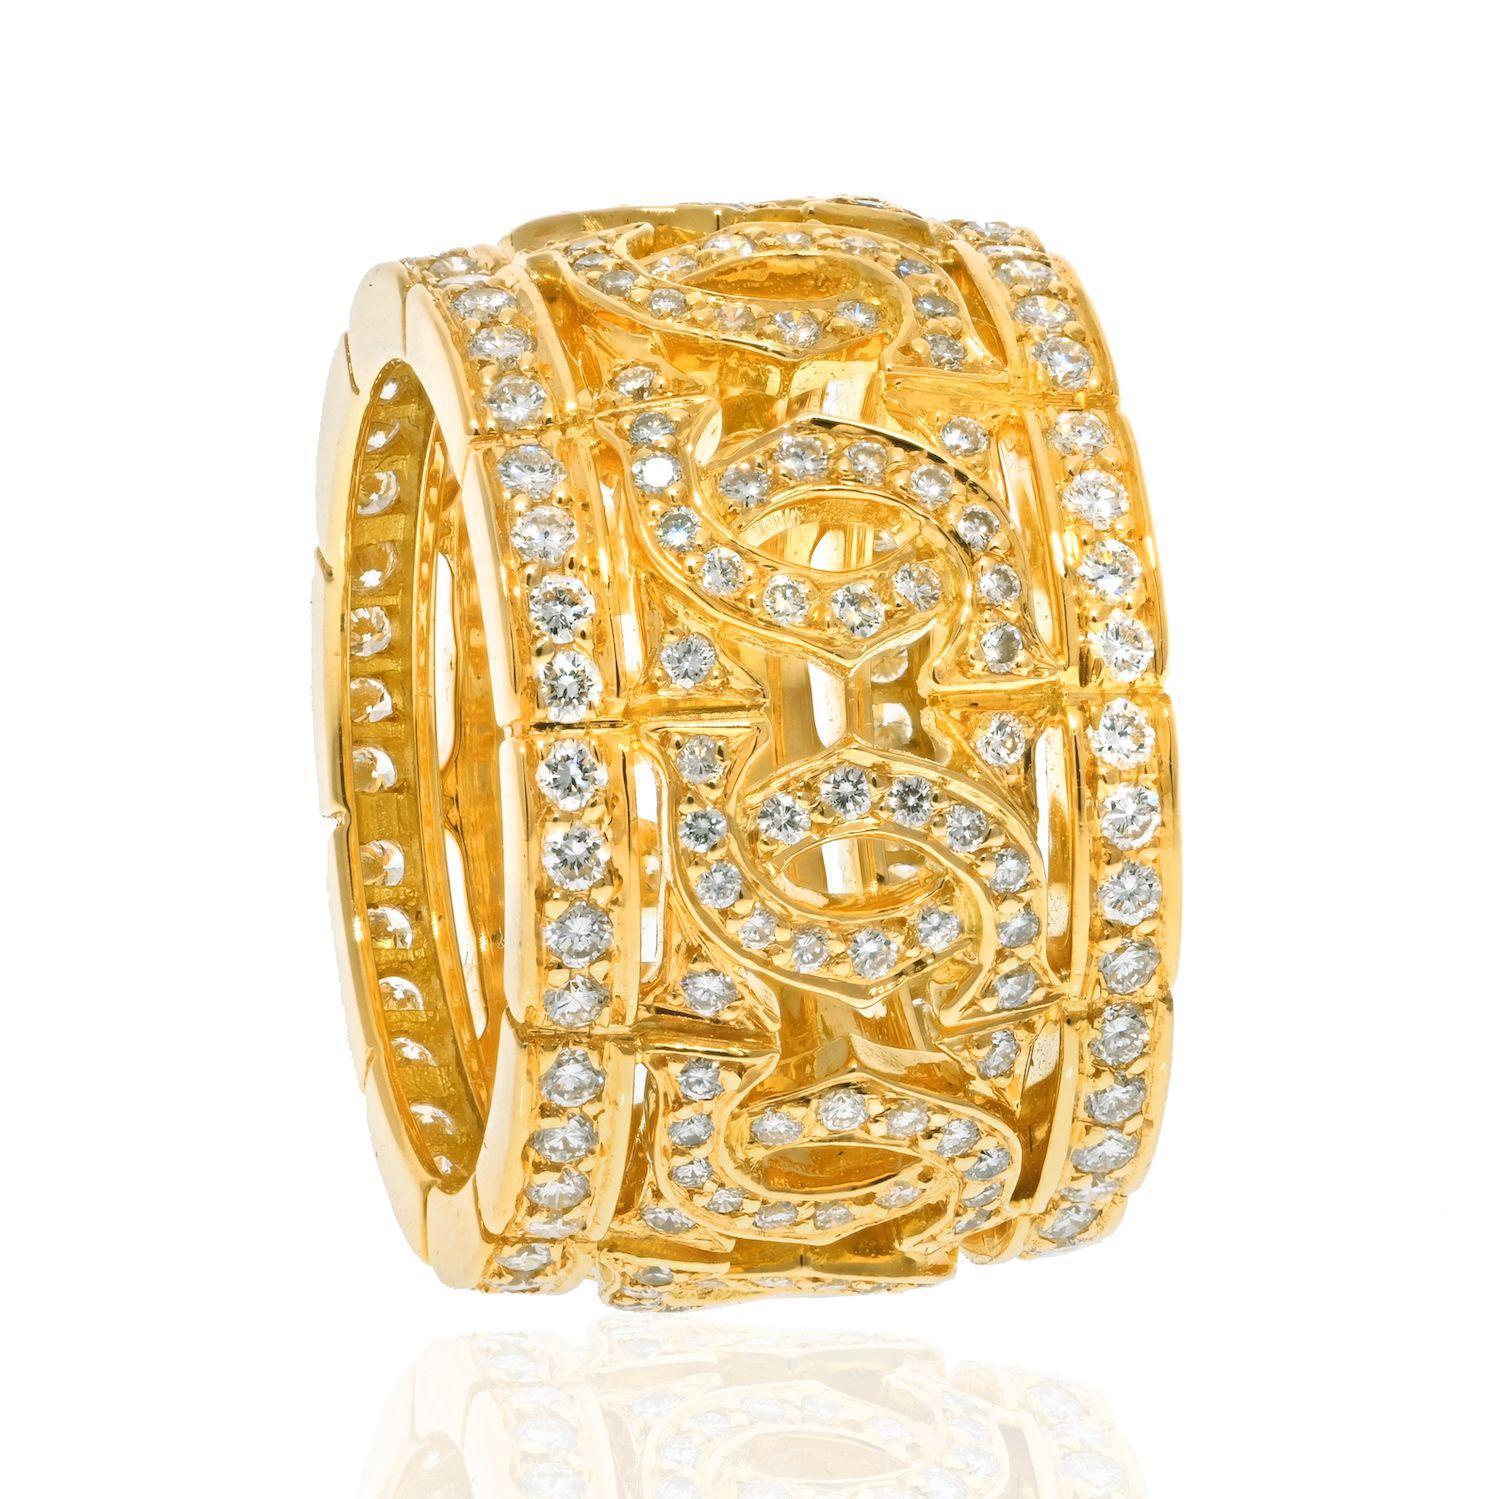 Cartier Entrelaces C de Cartier in 18K Yellow Gold Diamond Ring. 
From the C de Cartier Collection.
Carat Weight: 1.80
Stone Count: 240
With Cartier Certificate. 
EU Size 52. American size 5.75.

Here are five stylish ways to wear your Cartier